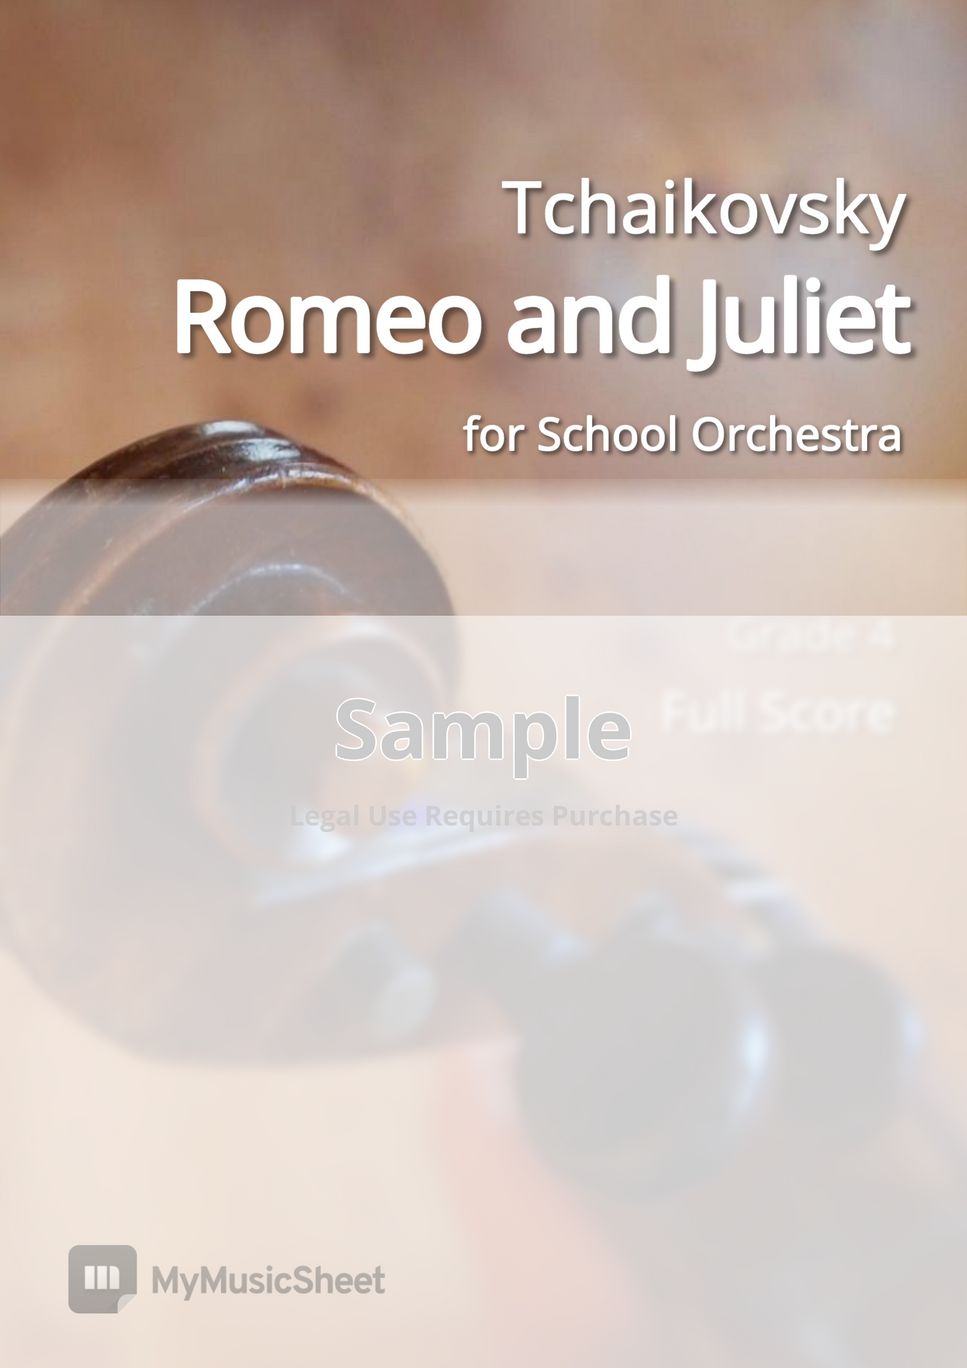 Tchaikovsky - Romeo and Juliet Overture for School Orchestra (Score) by Youngsuk Kim